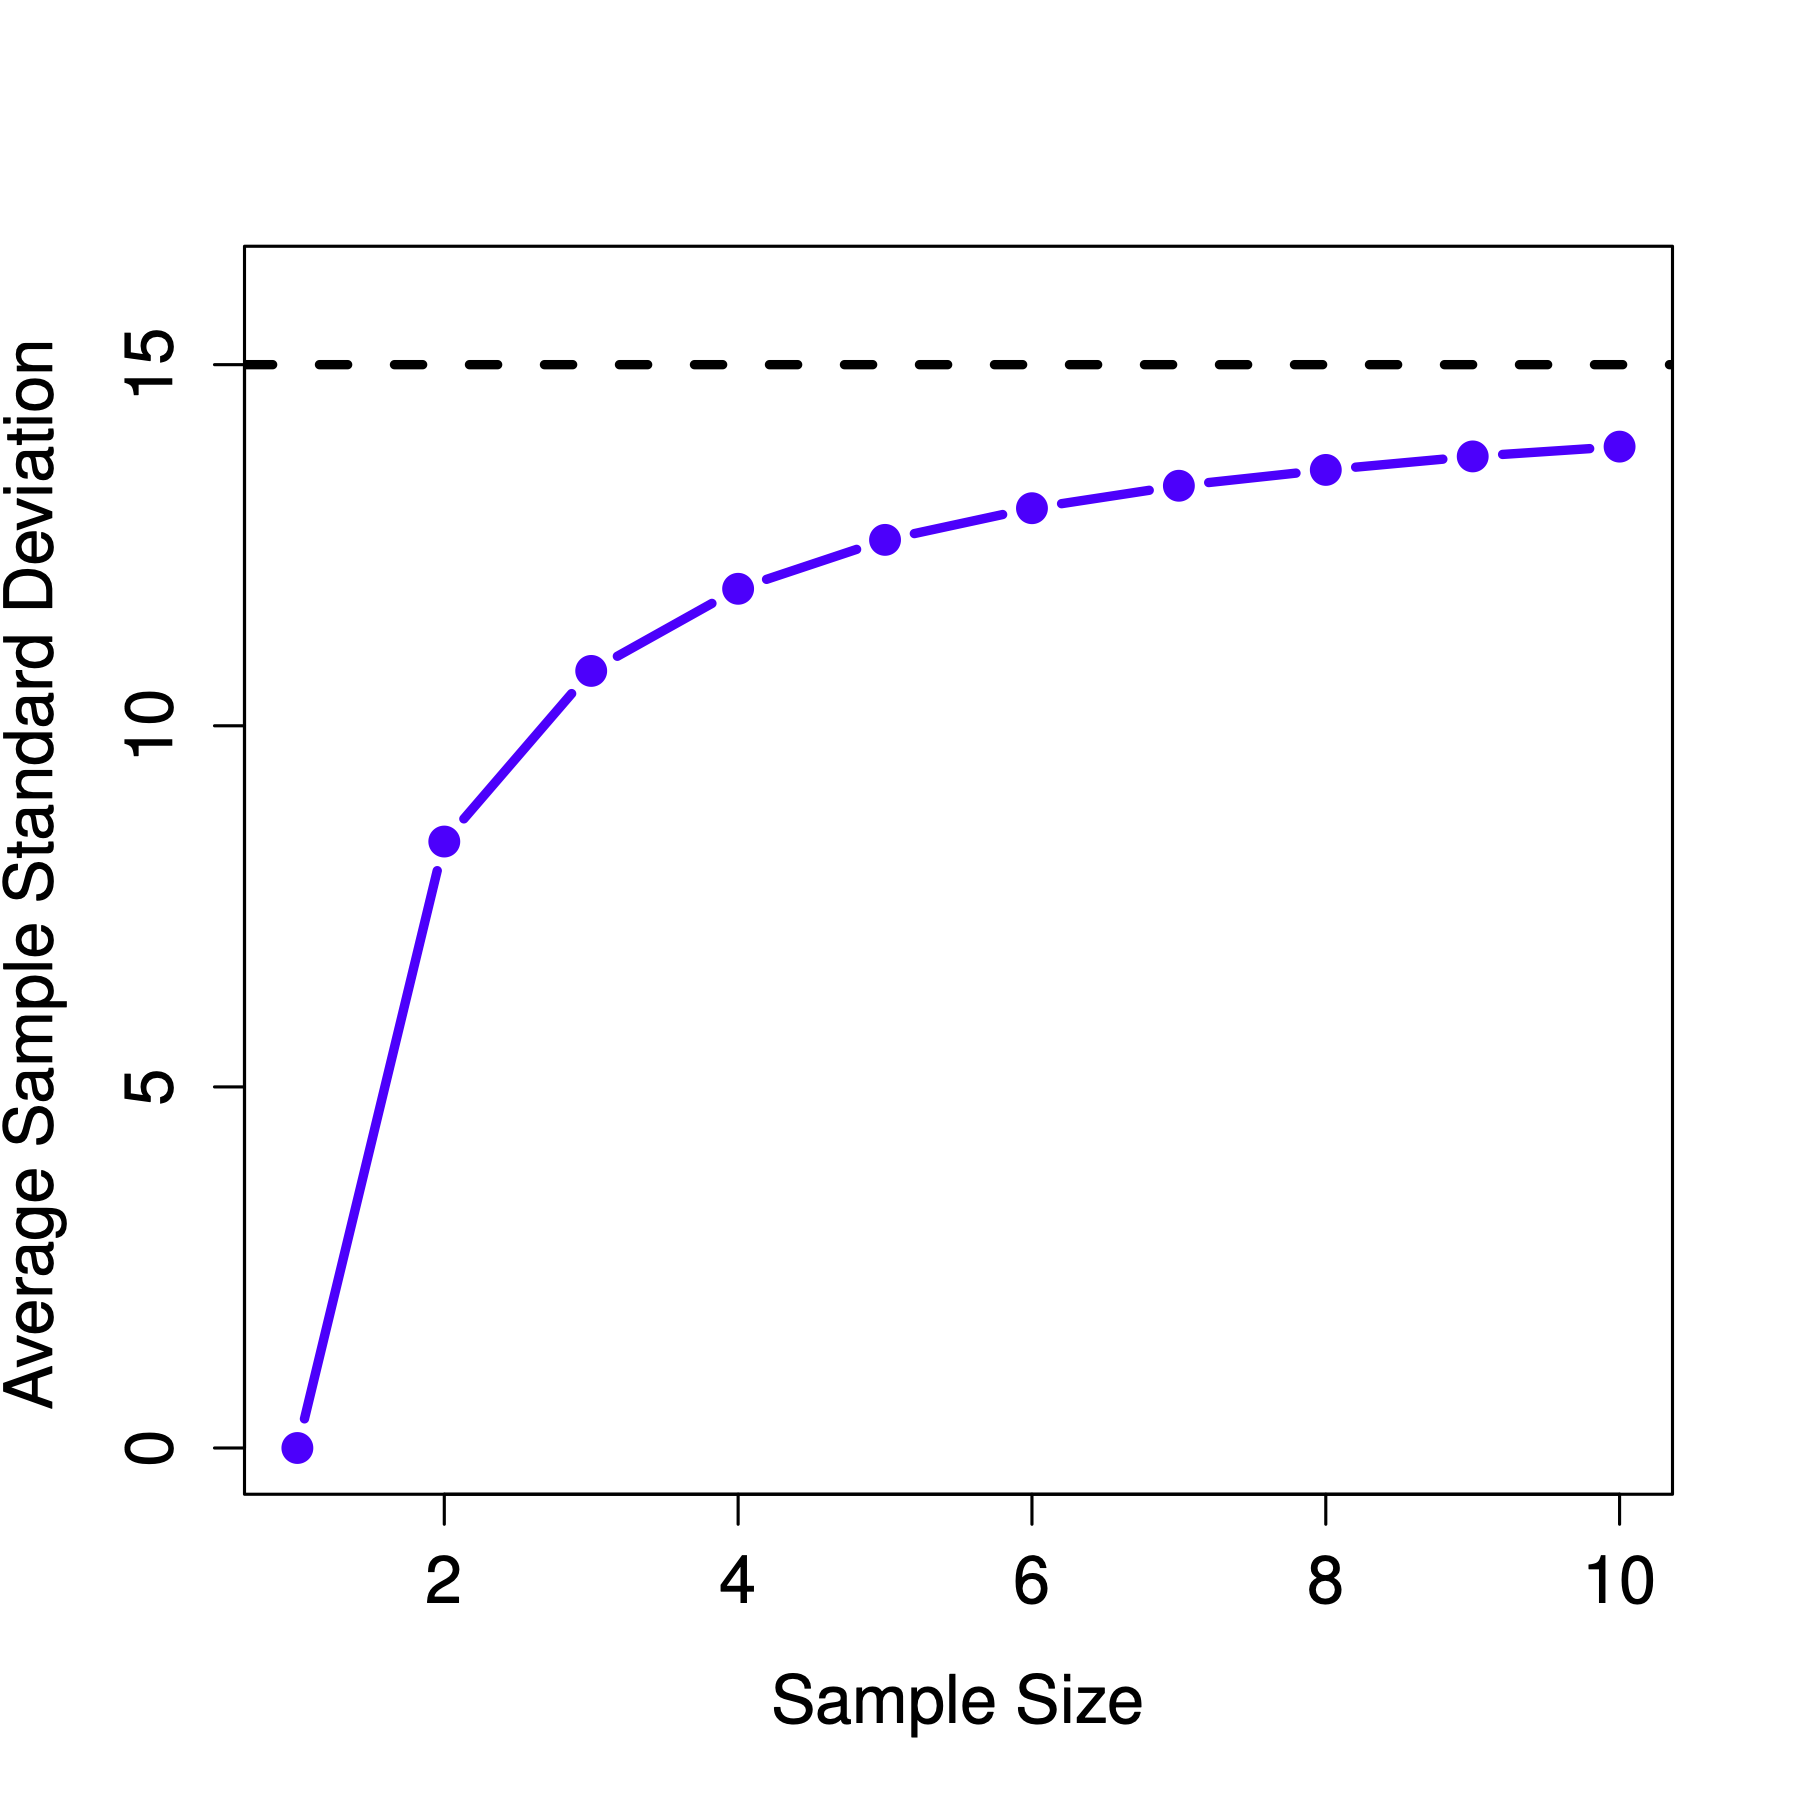 An illustration of the fact that the sample mean is an unbiased estimator of the population mean (panel a). Still, the sample standard deviation is a biased estimator of the population standard deviation (panel b). To generate the figure, we have 10,000 simulated data sets with 1 observation each, 10,000 more with 2 observations, and so on up to a sample size of 10. Each data set consisted of fake IQ data: the data were normally distributed with a true population mean of 100 and standard deviation 15. On average, the sample means turn out to be 100, regardless of sample size (panel a). However, the sample standard deviations turn out to be systematically too small (panel b), especially for small sample sizes.